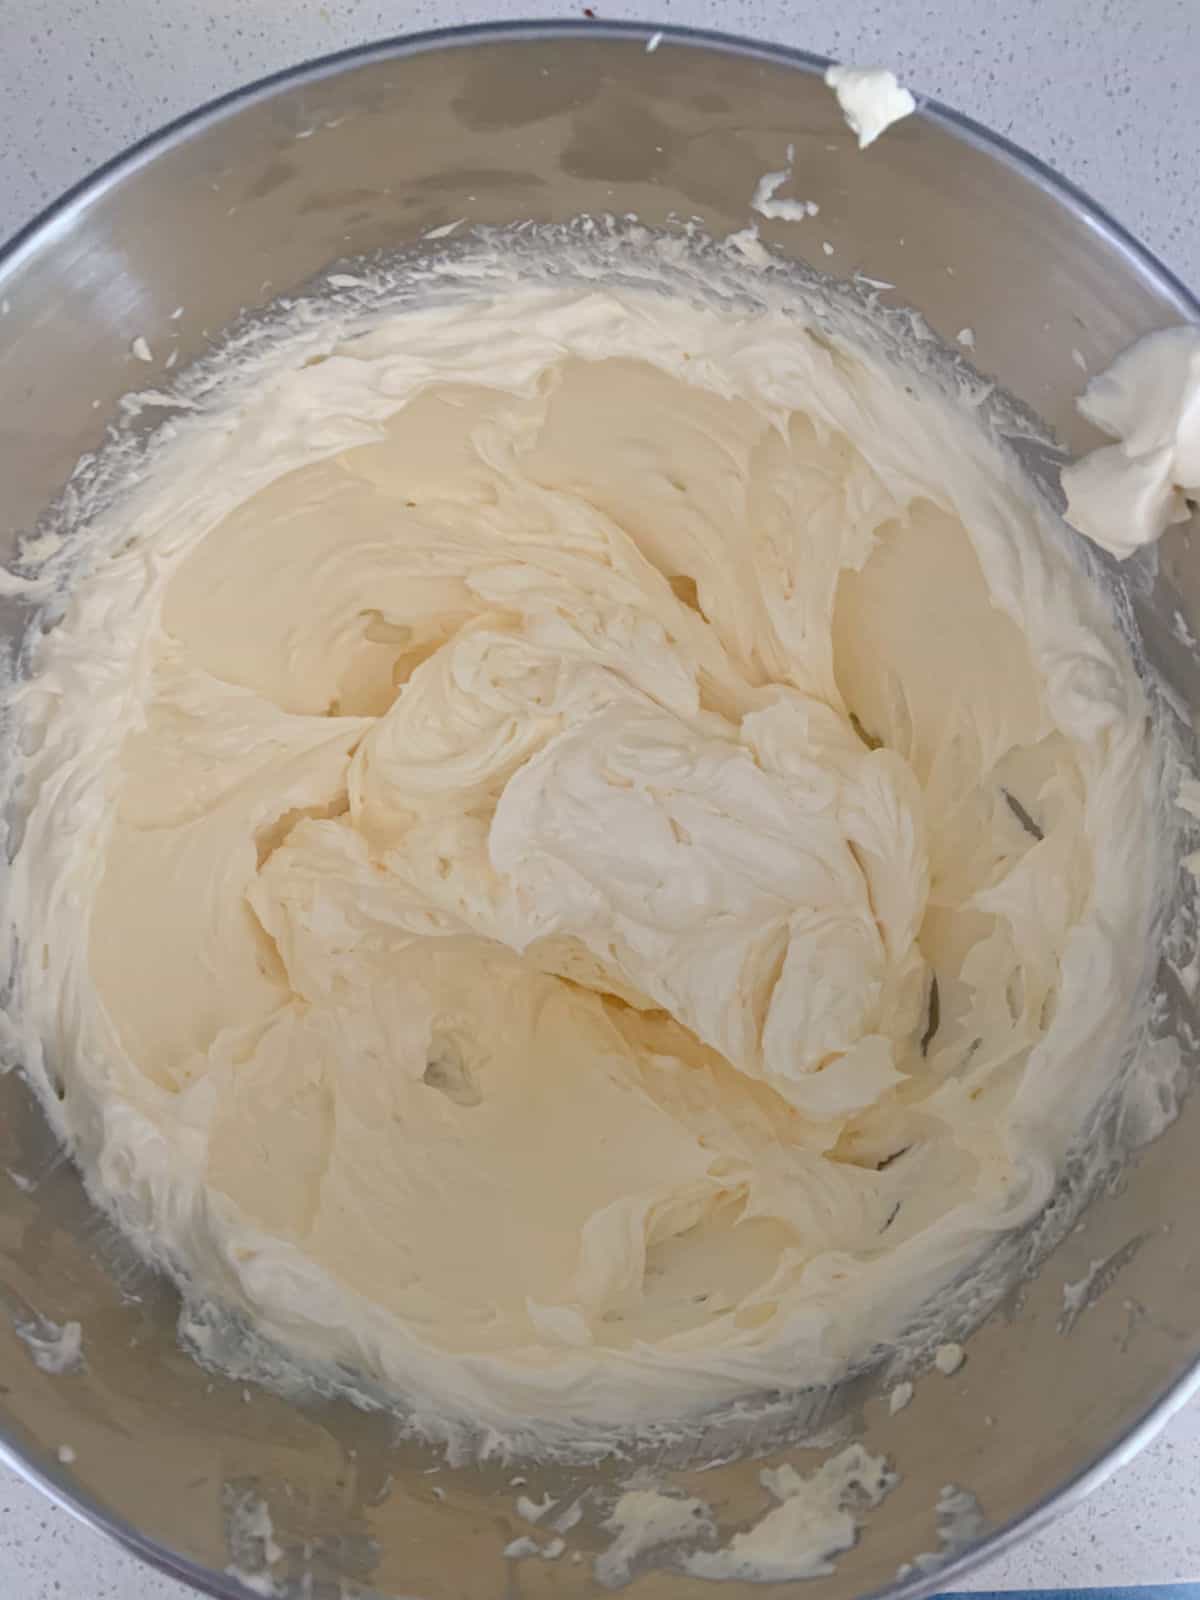 sweetened condensed milk, sugar and butter combined in a mixer bowl.